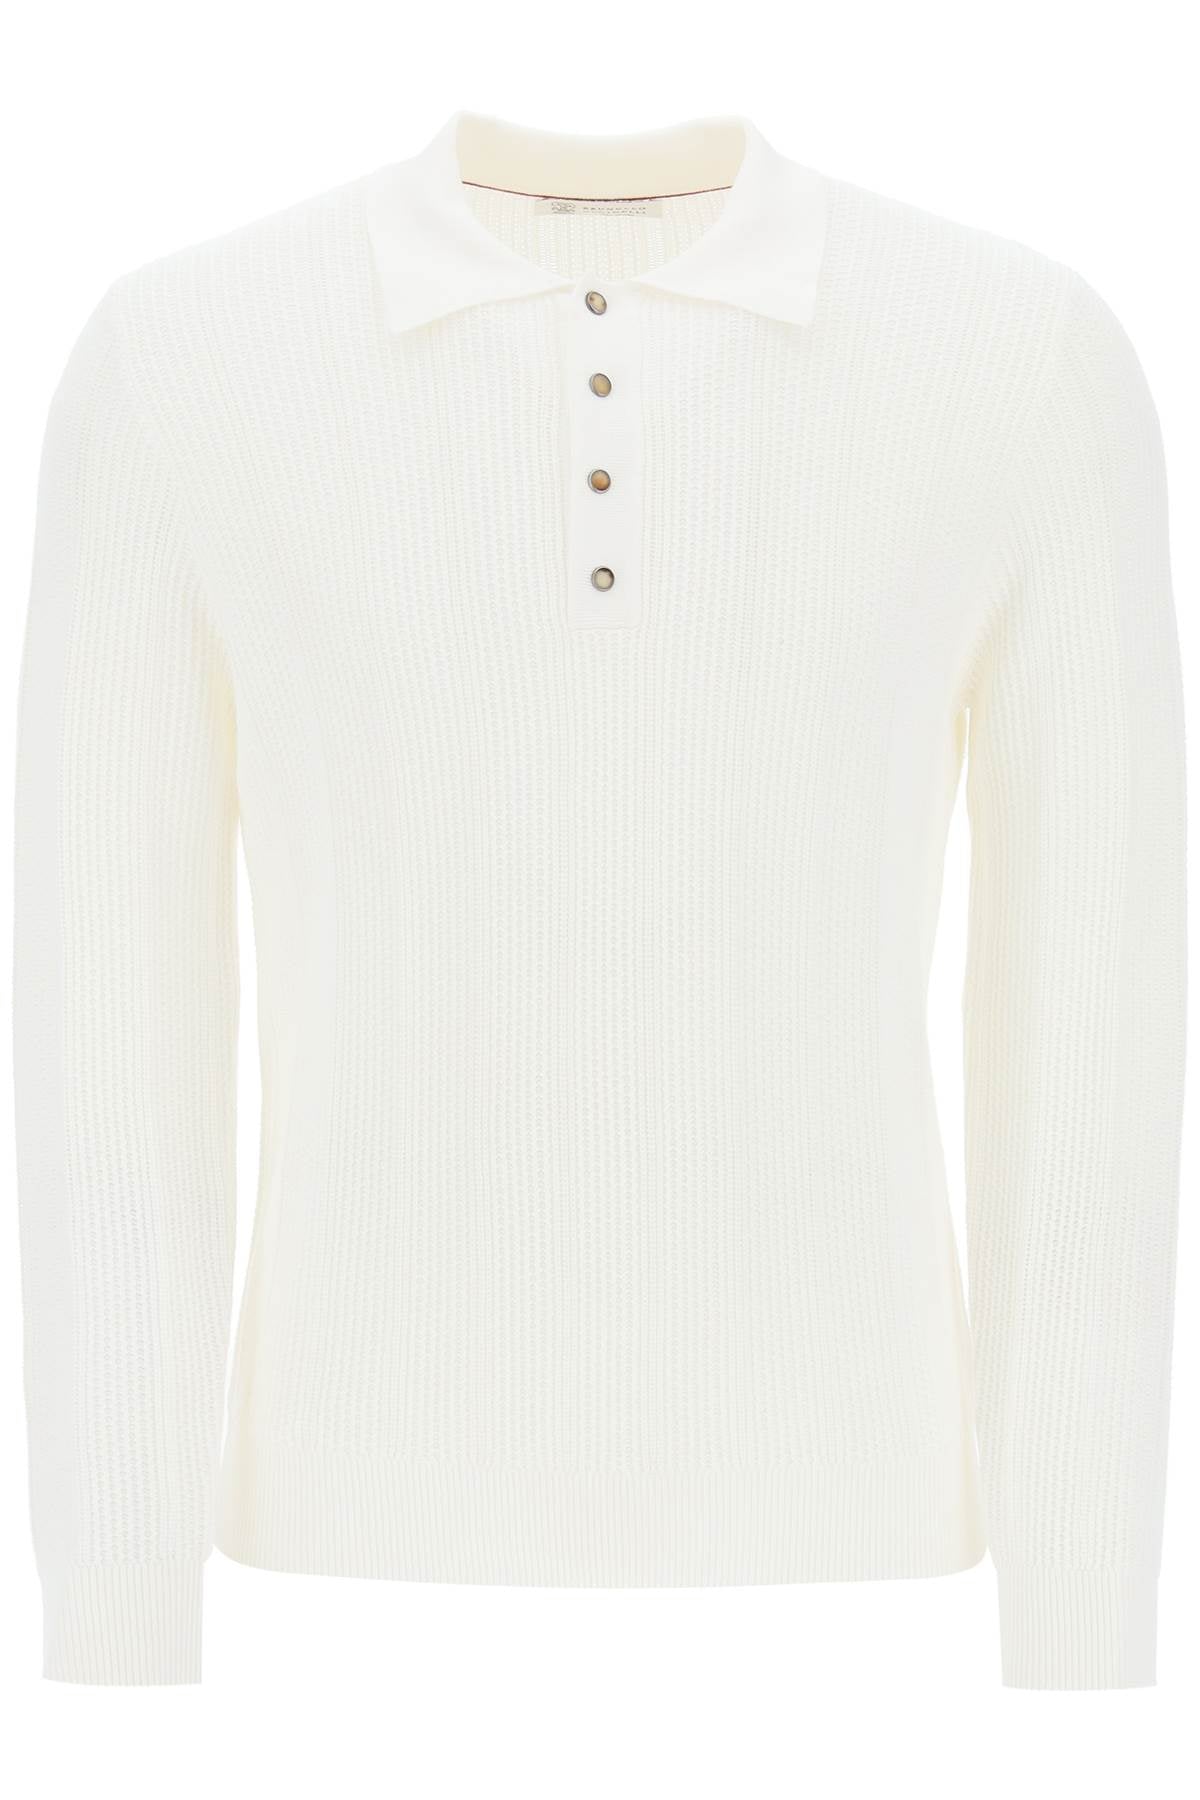 Brunello cucinelli long-sleeved knitted polo shirt-men > clothing > t-shirts and sweatshirts > polos-Brunello Cucinelli-Urbanheer